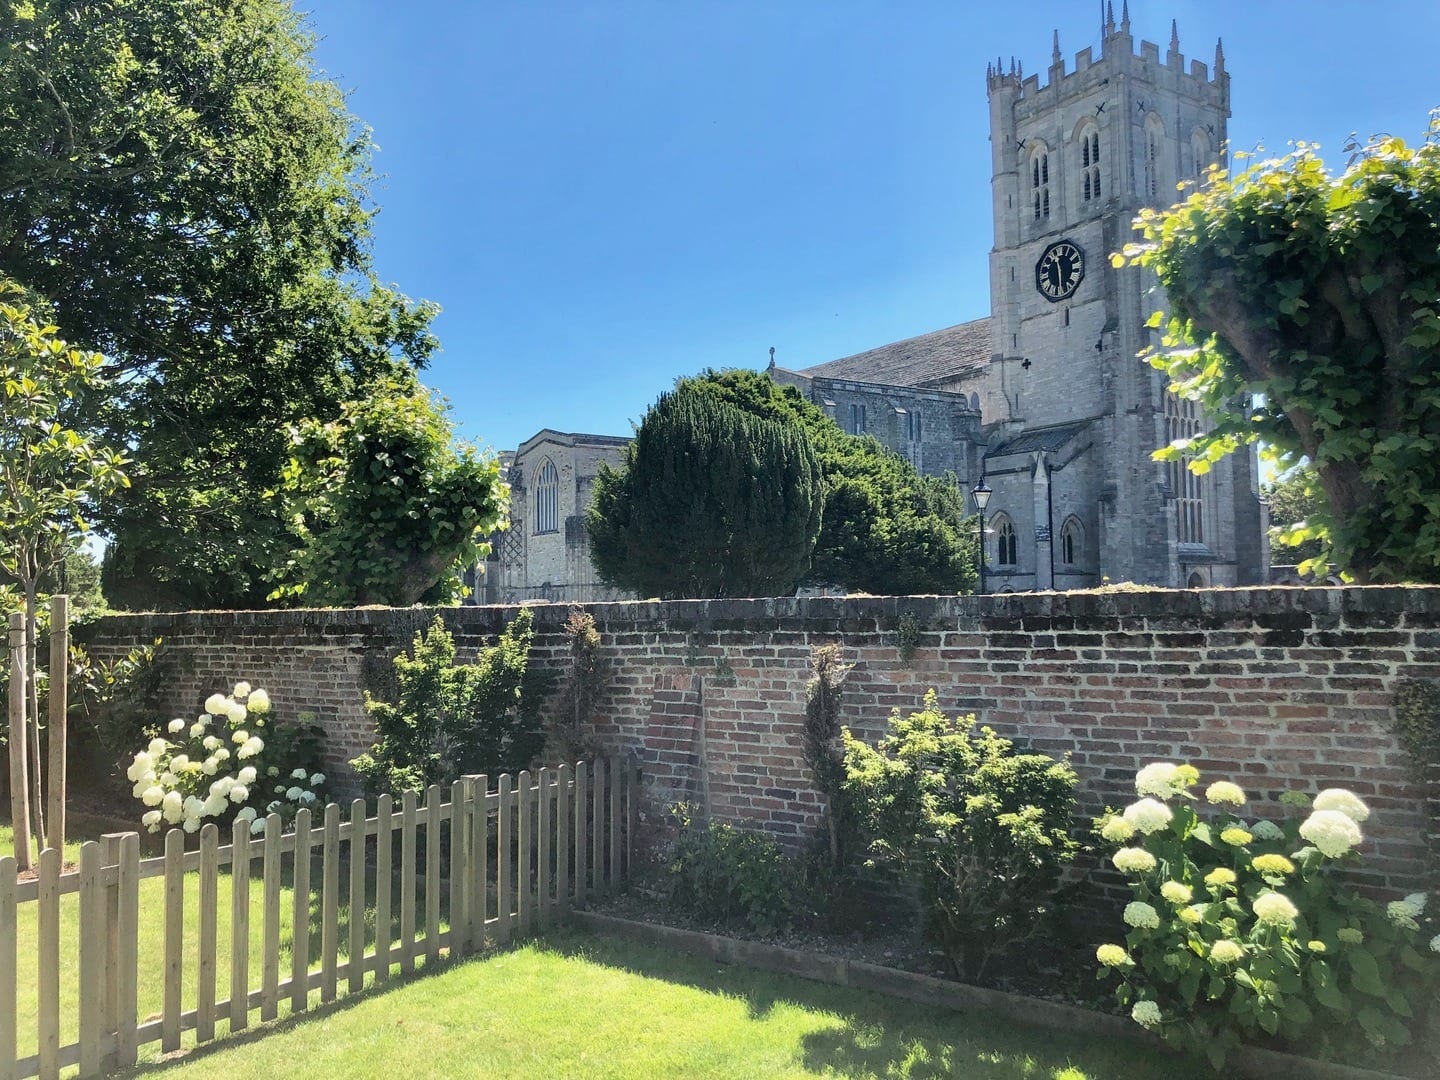 Quay House fantastic garden view of Christchurch Priory surrounded by beautiful flowers and trees